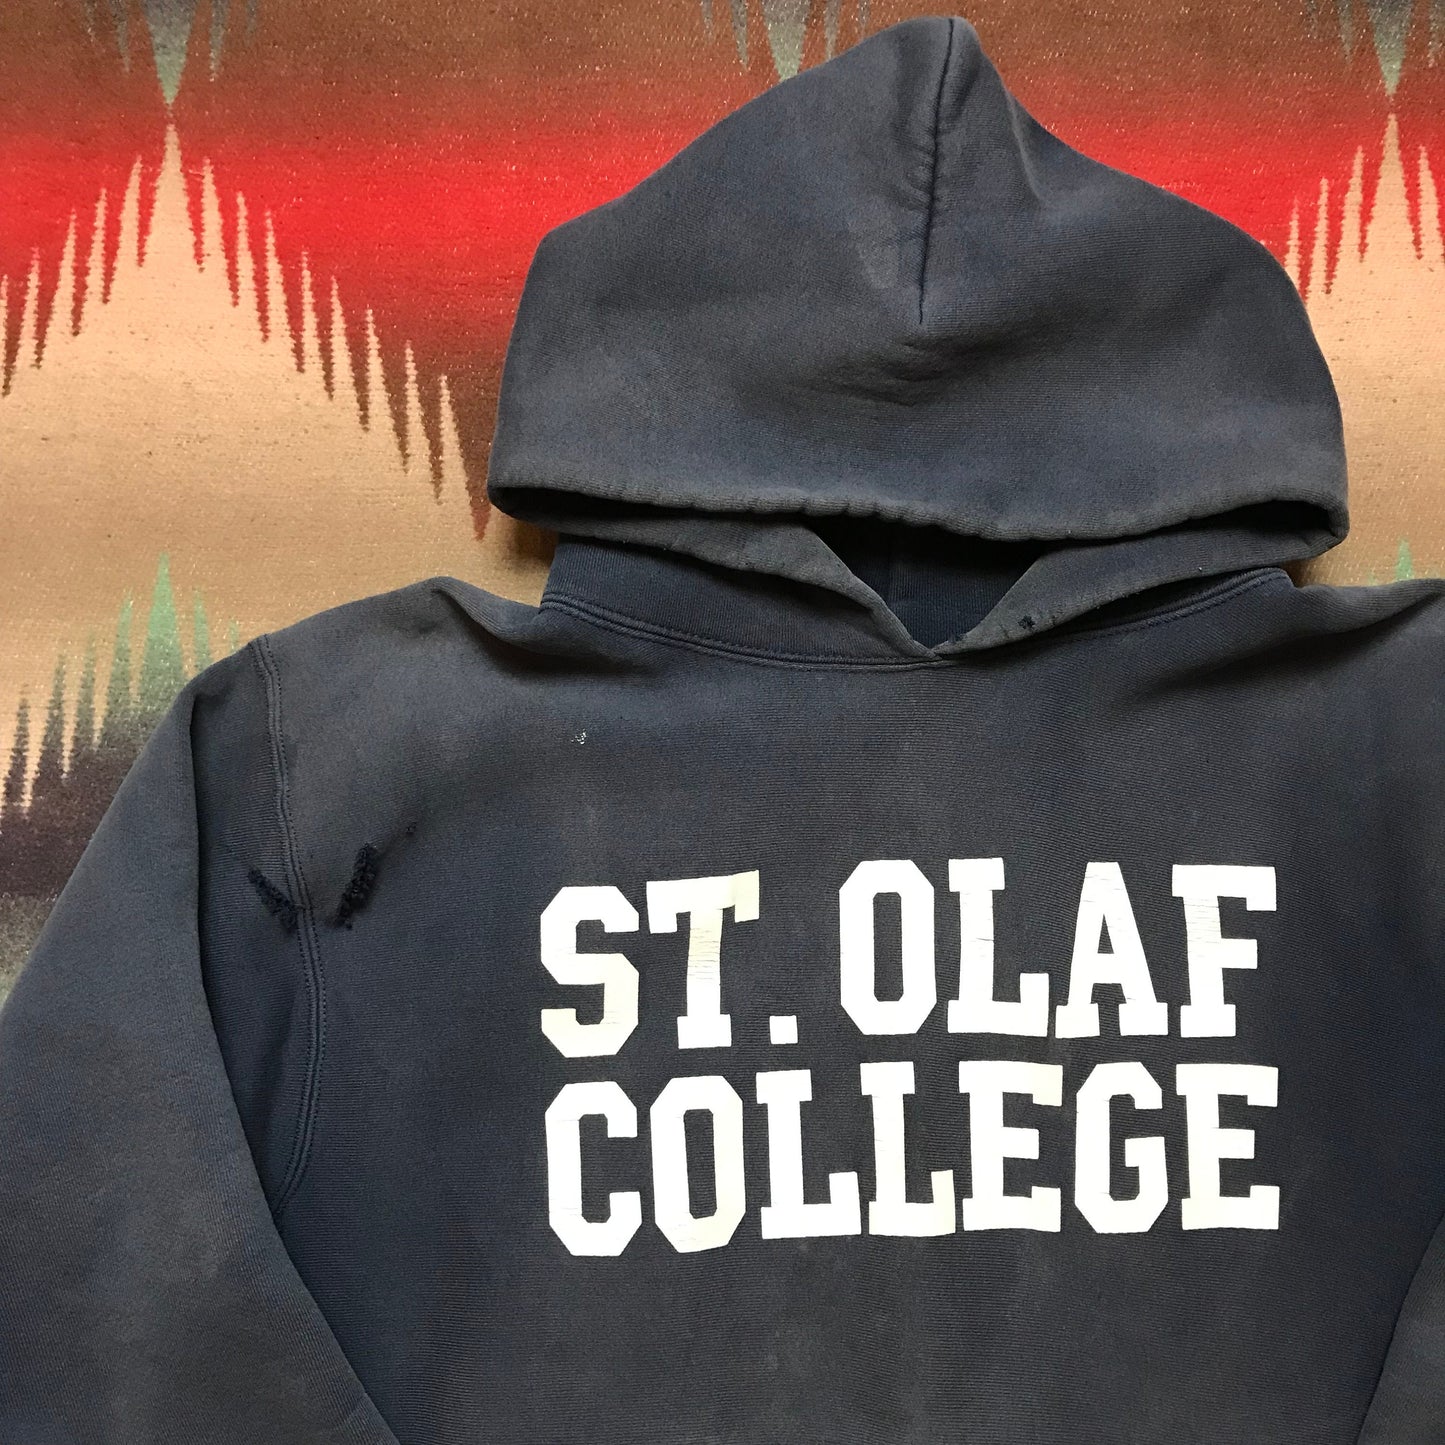 1990s Distressed St. Olaf College Cotton Exchange Heavyweight Hoodie Sweatshirt Made in USA Size M/L